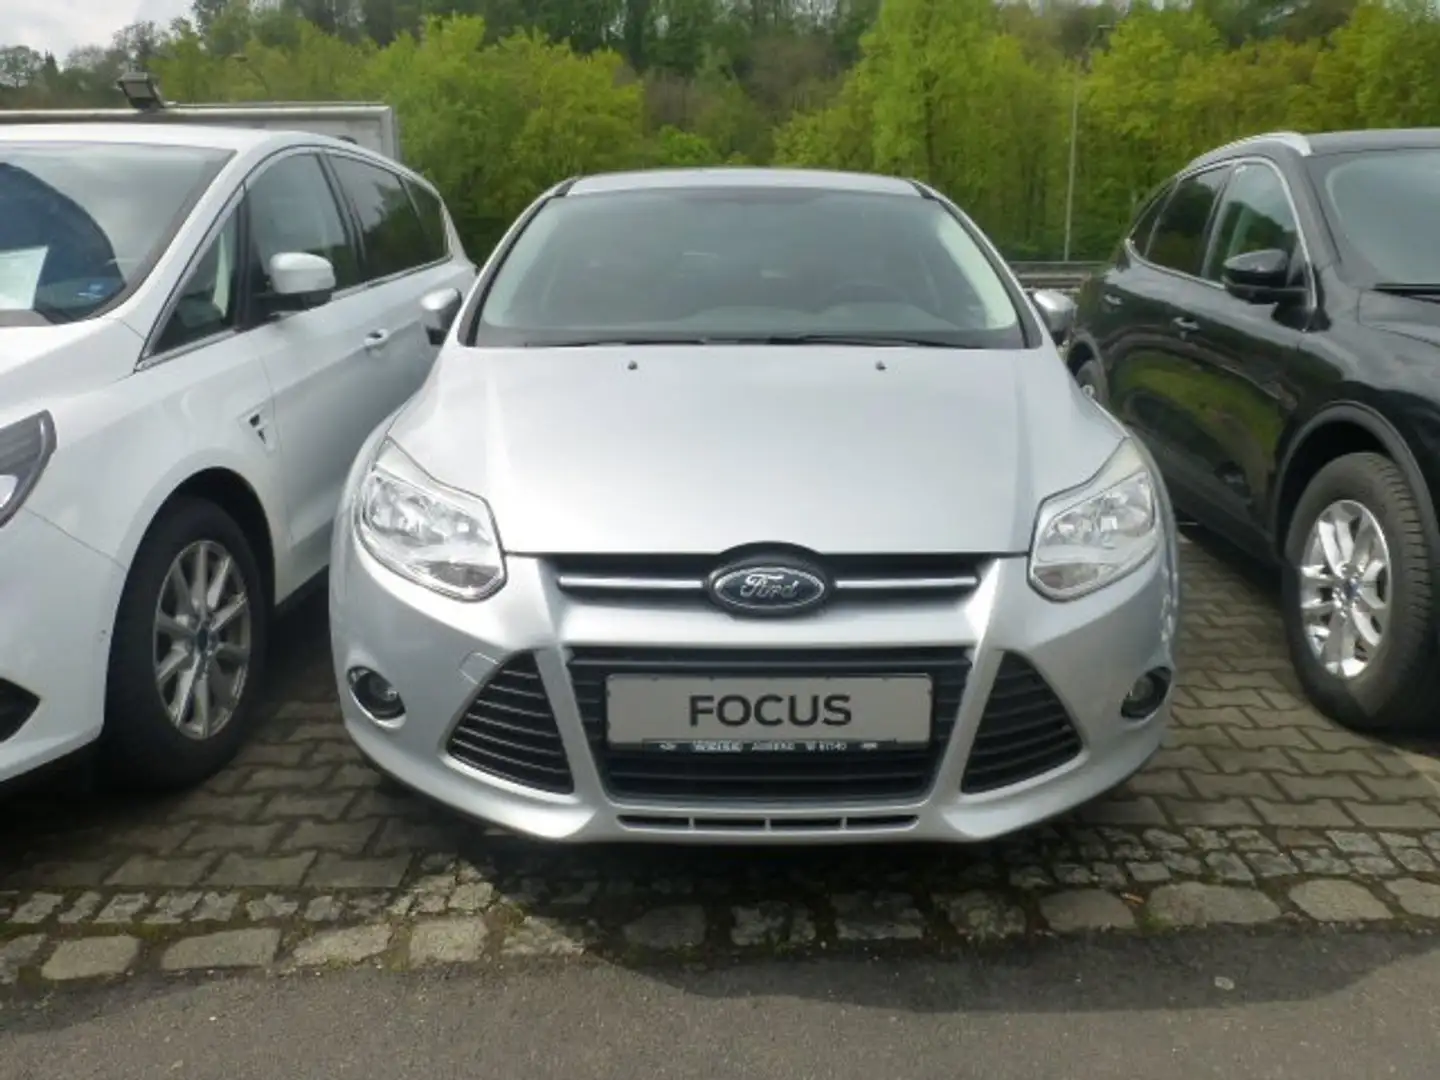 Ford Focus Trend_PDC_115 PS_Metallic_Audio_WintPaket - 2